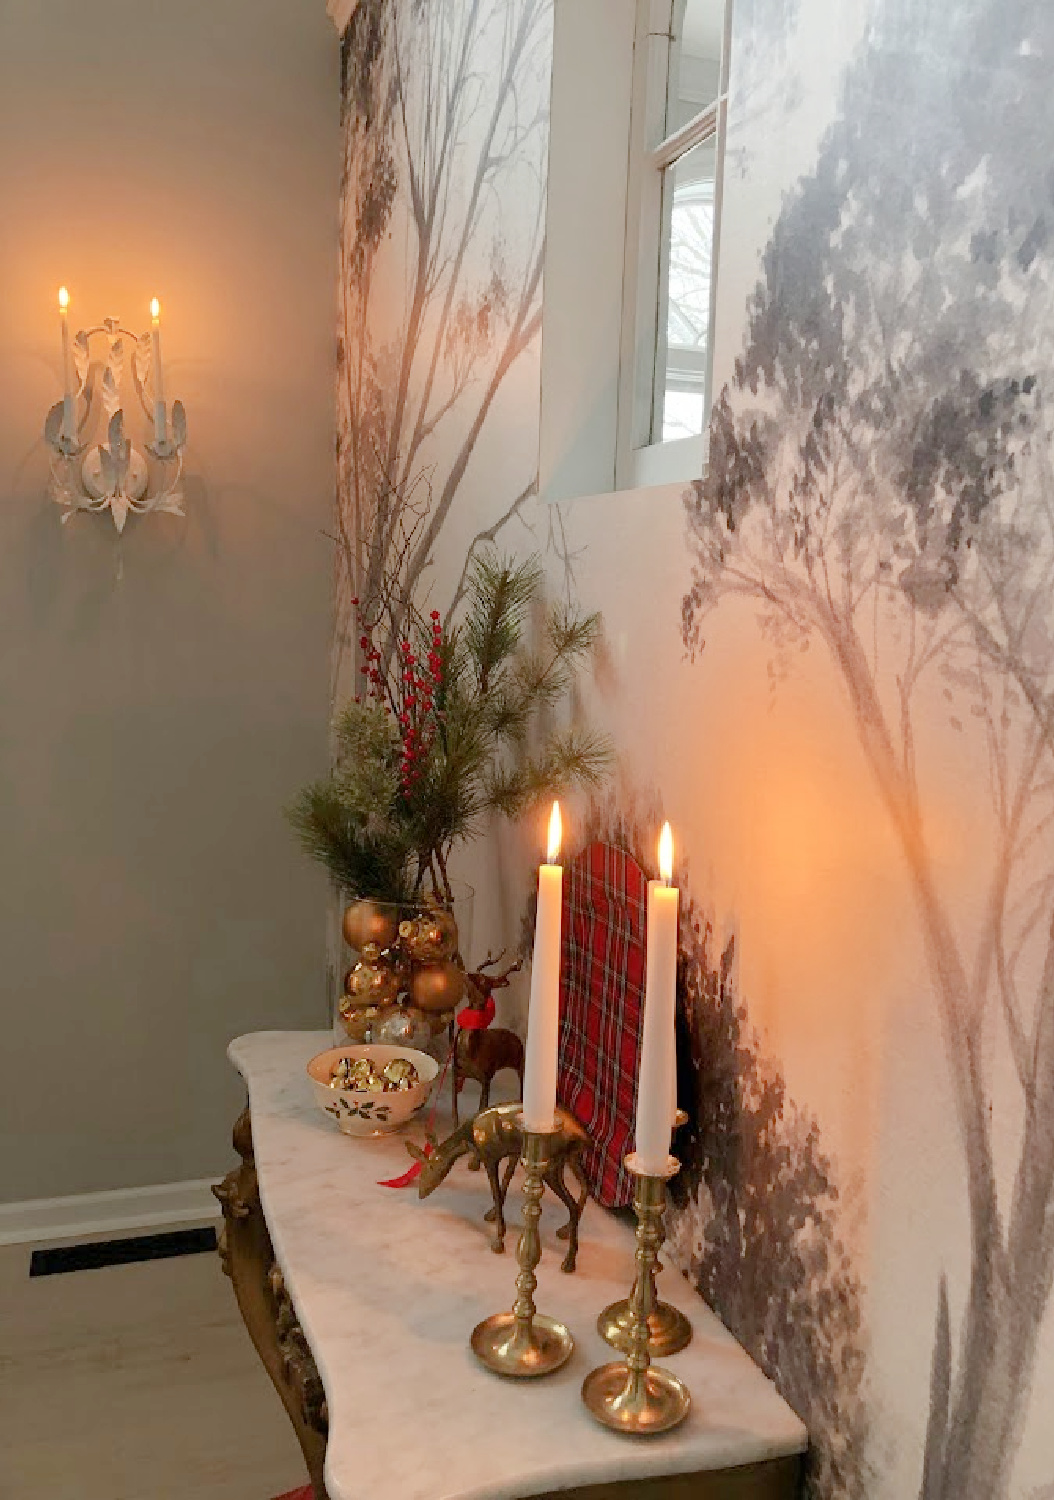 Scenic tree wallpaper mural and French console decorated for Christmas in our Georgian entry - Hello Lovely Studio.